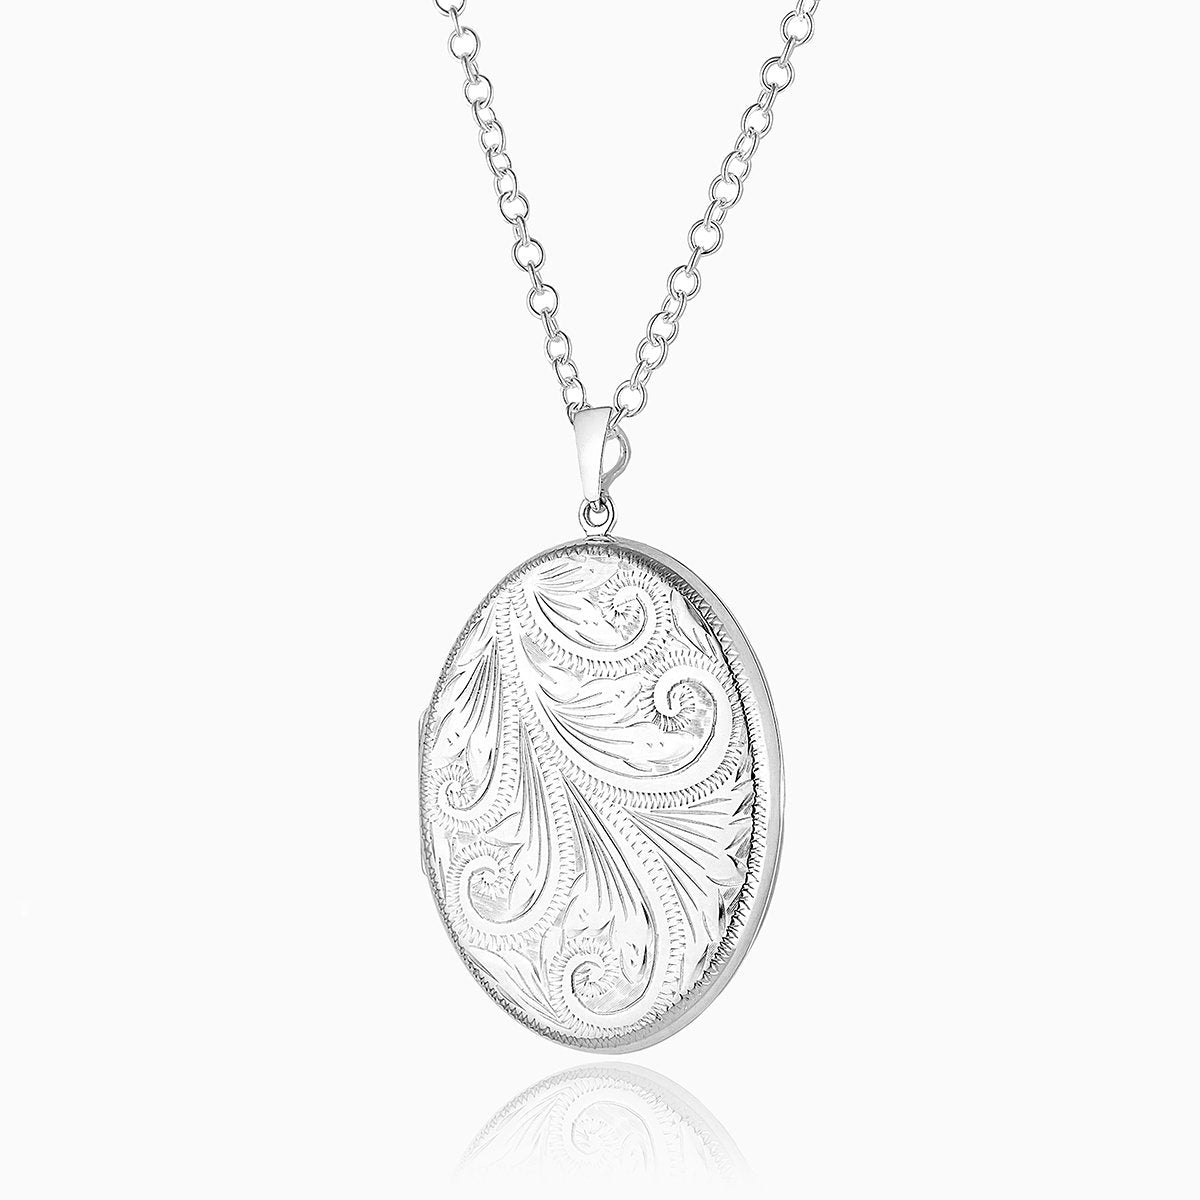 Product title: Extra Large Victorian Foliate Oval Locket, product type: Locket